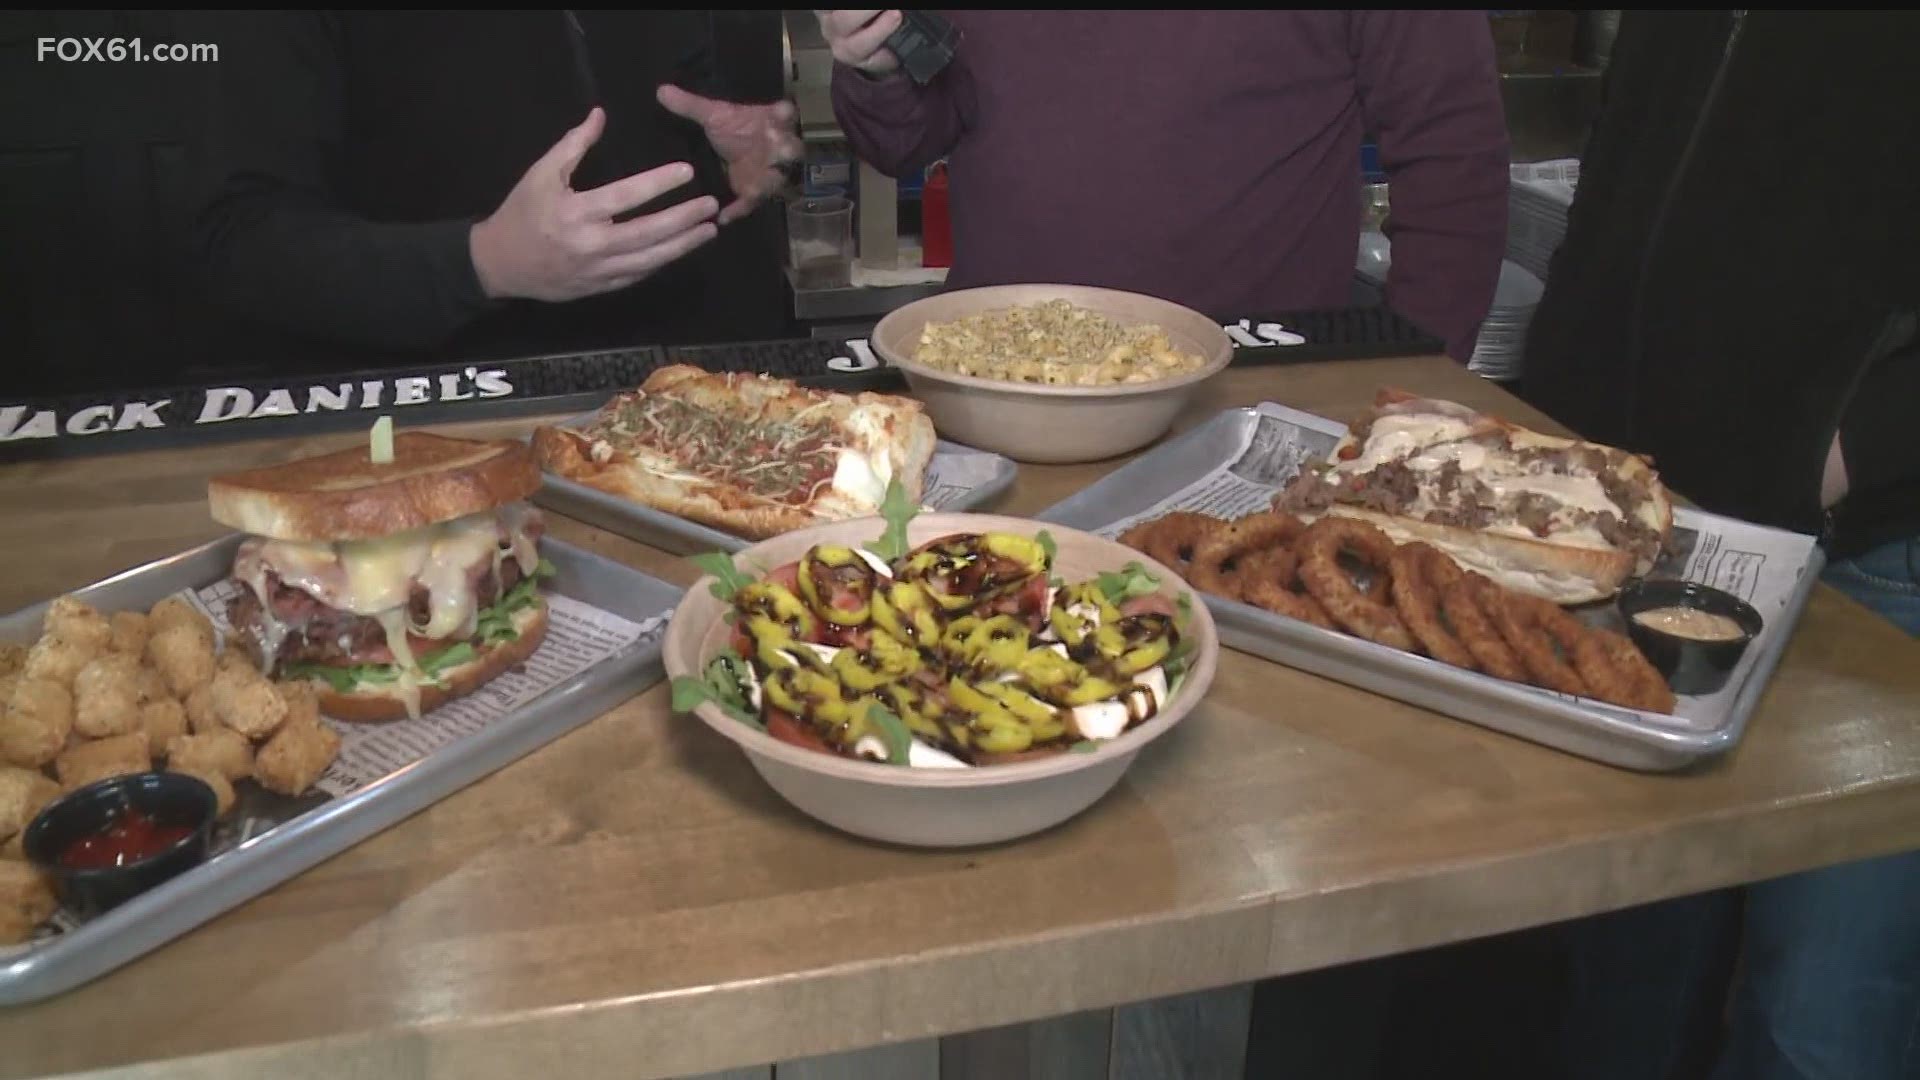 For today's #FoodieFriday on FOX61, Sean Pragano is live in Granby at Four Dads Pub.